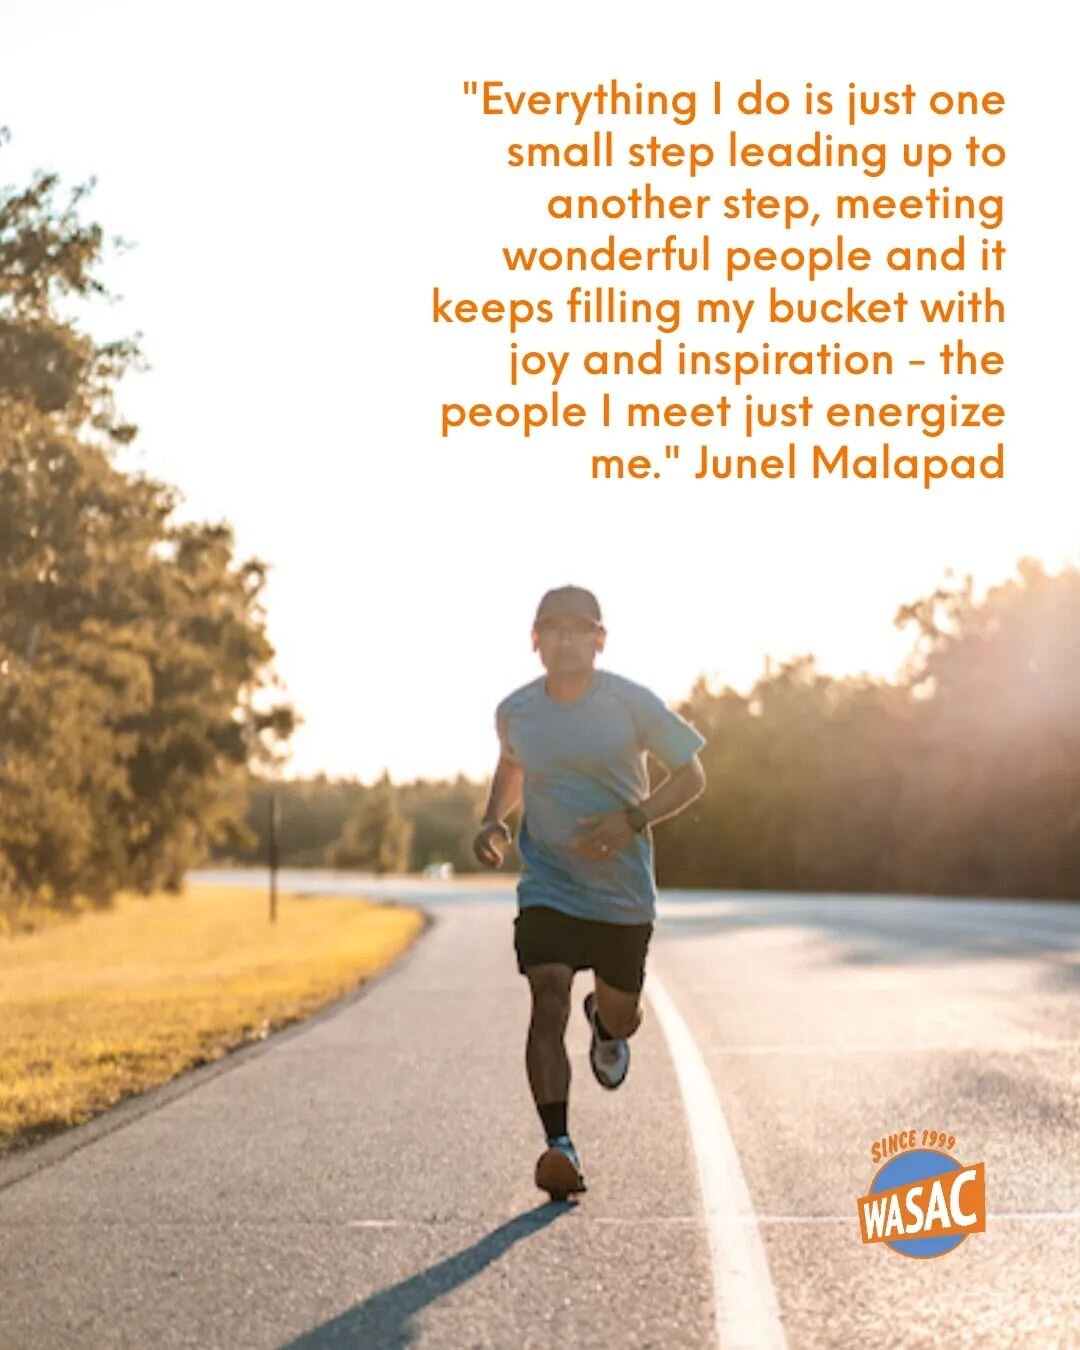 For seven days, beginning on May 1, Junel Malapad will be embarking on an ambitious journey across our province. He will be running the width of Manitoba with each day putting in just over 1.5 marathons totaling the distance of 490 kms. Junel will st